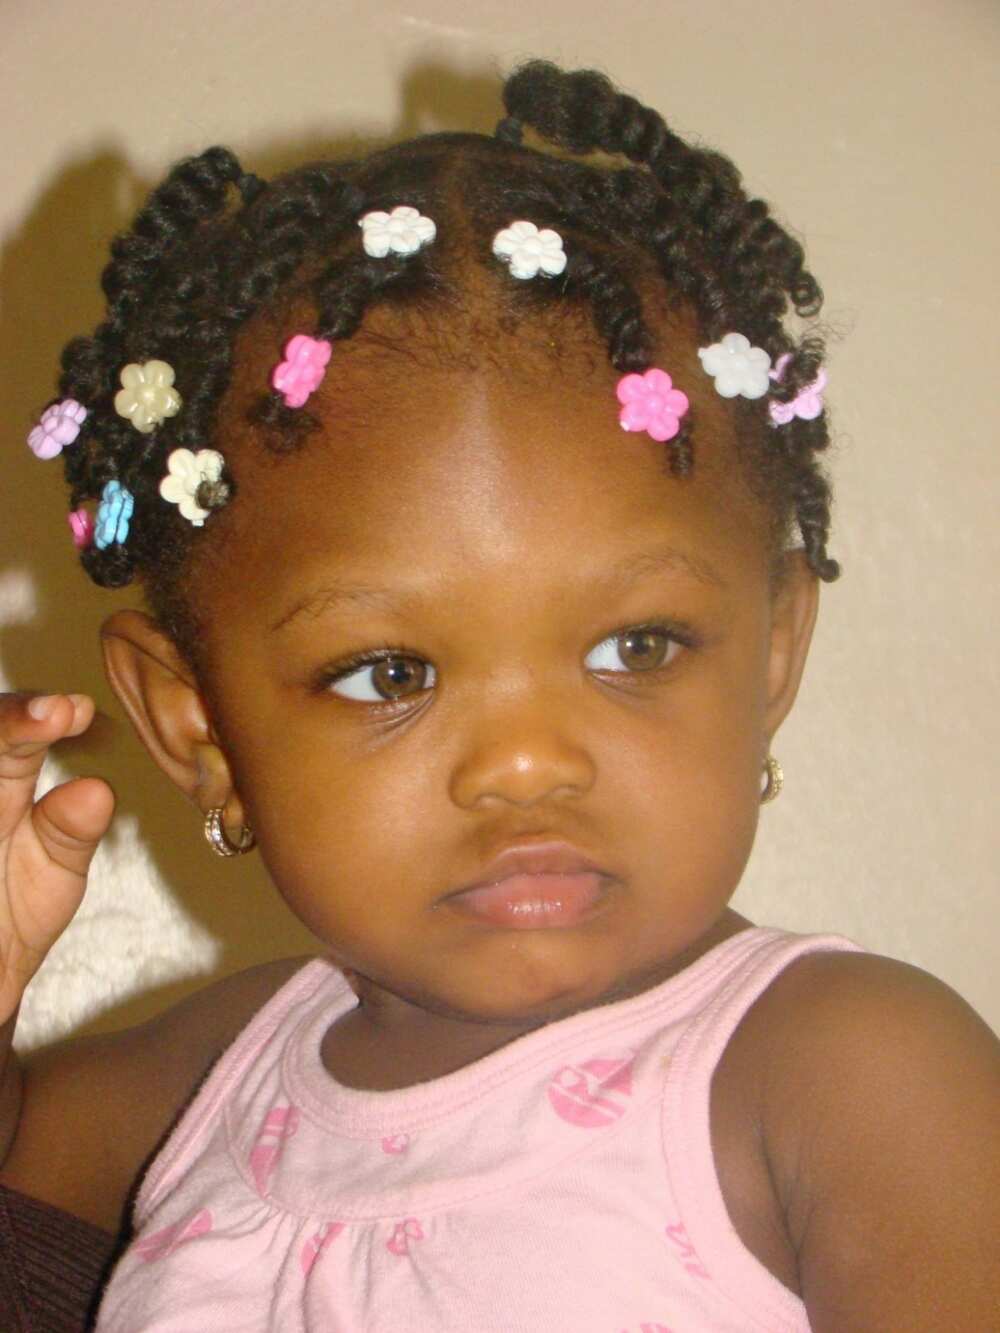 Toddler braided hairstyles with beads for girls - Legit.ng